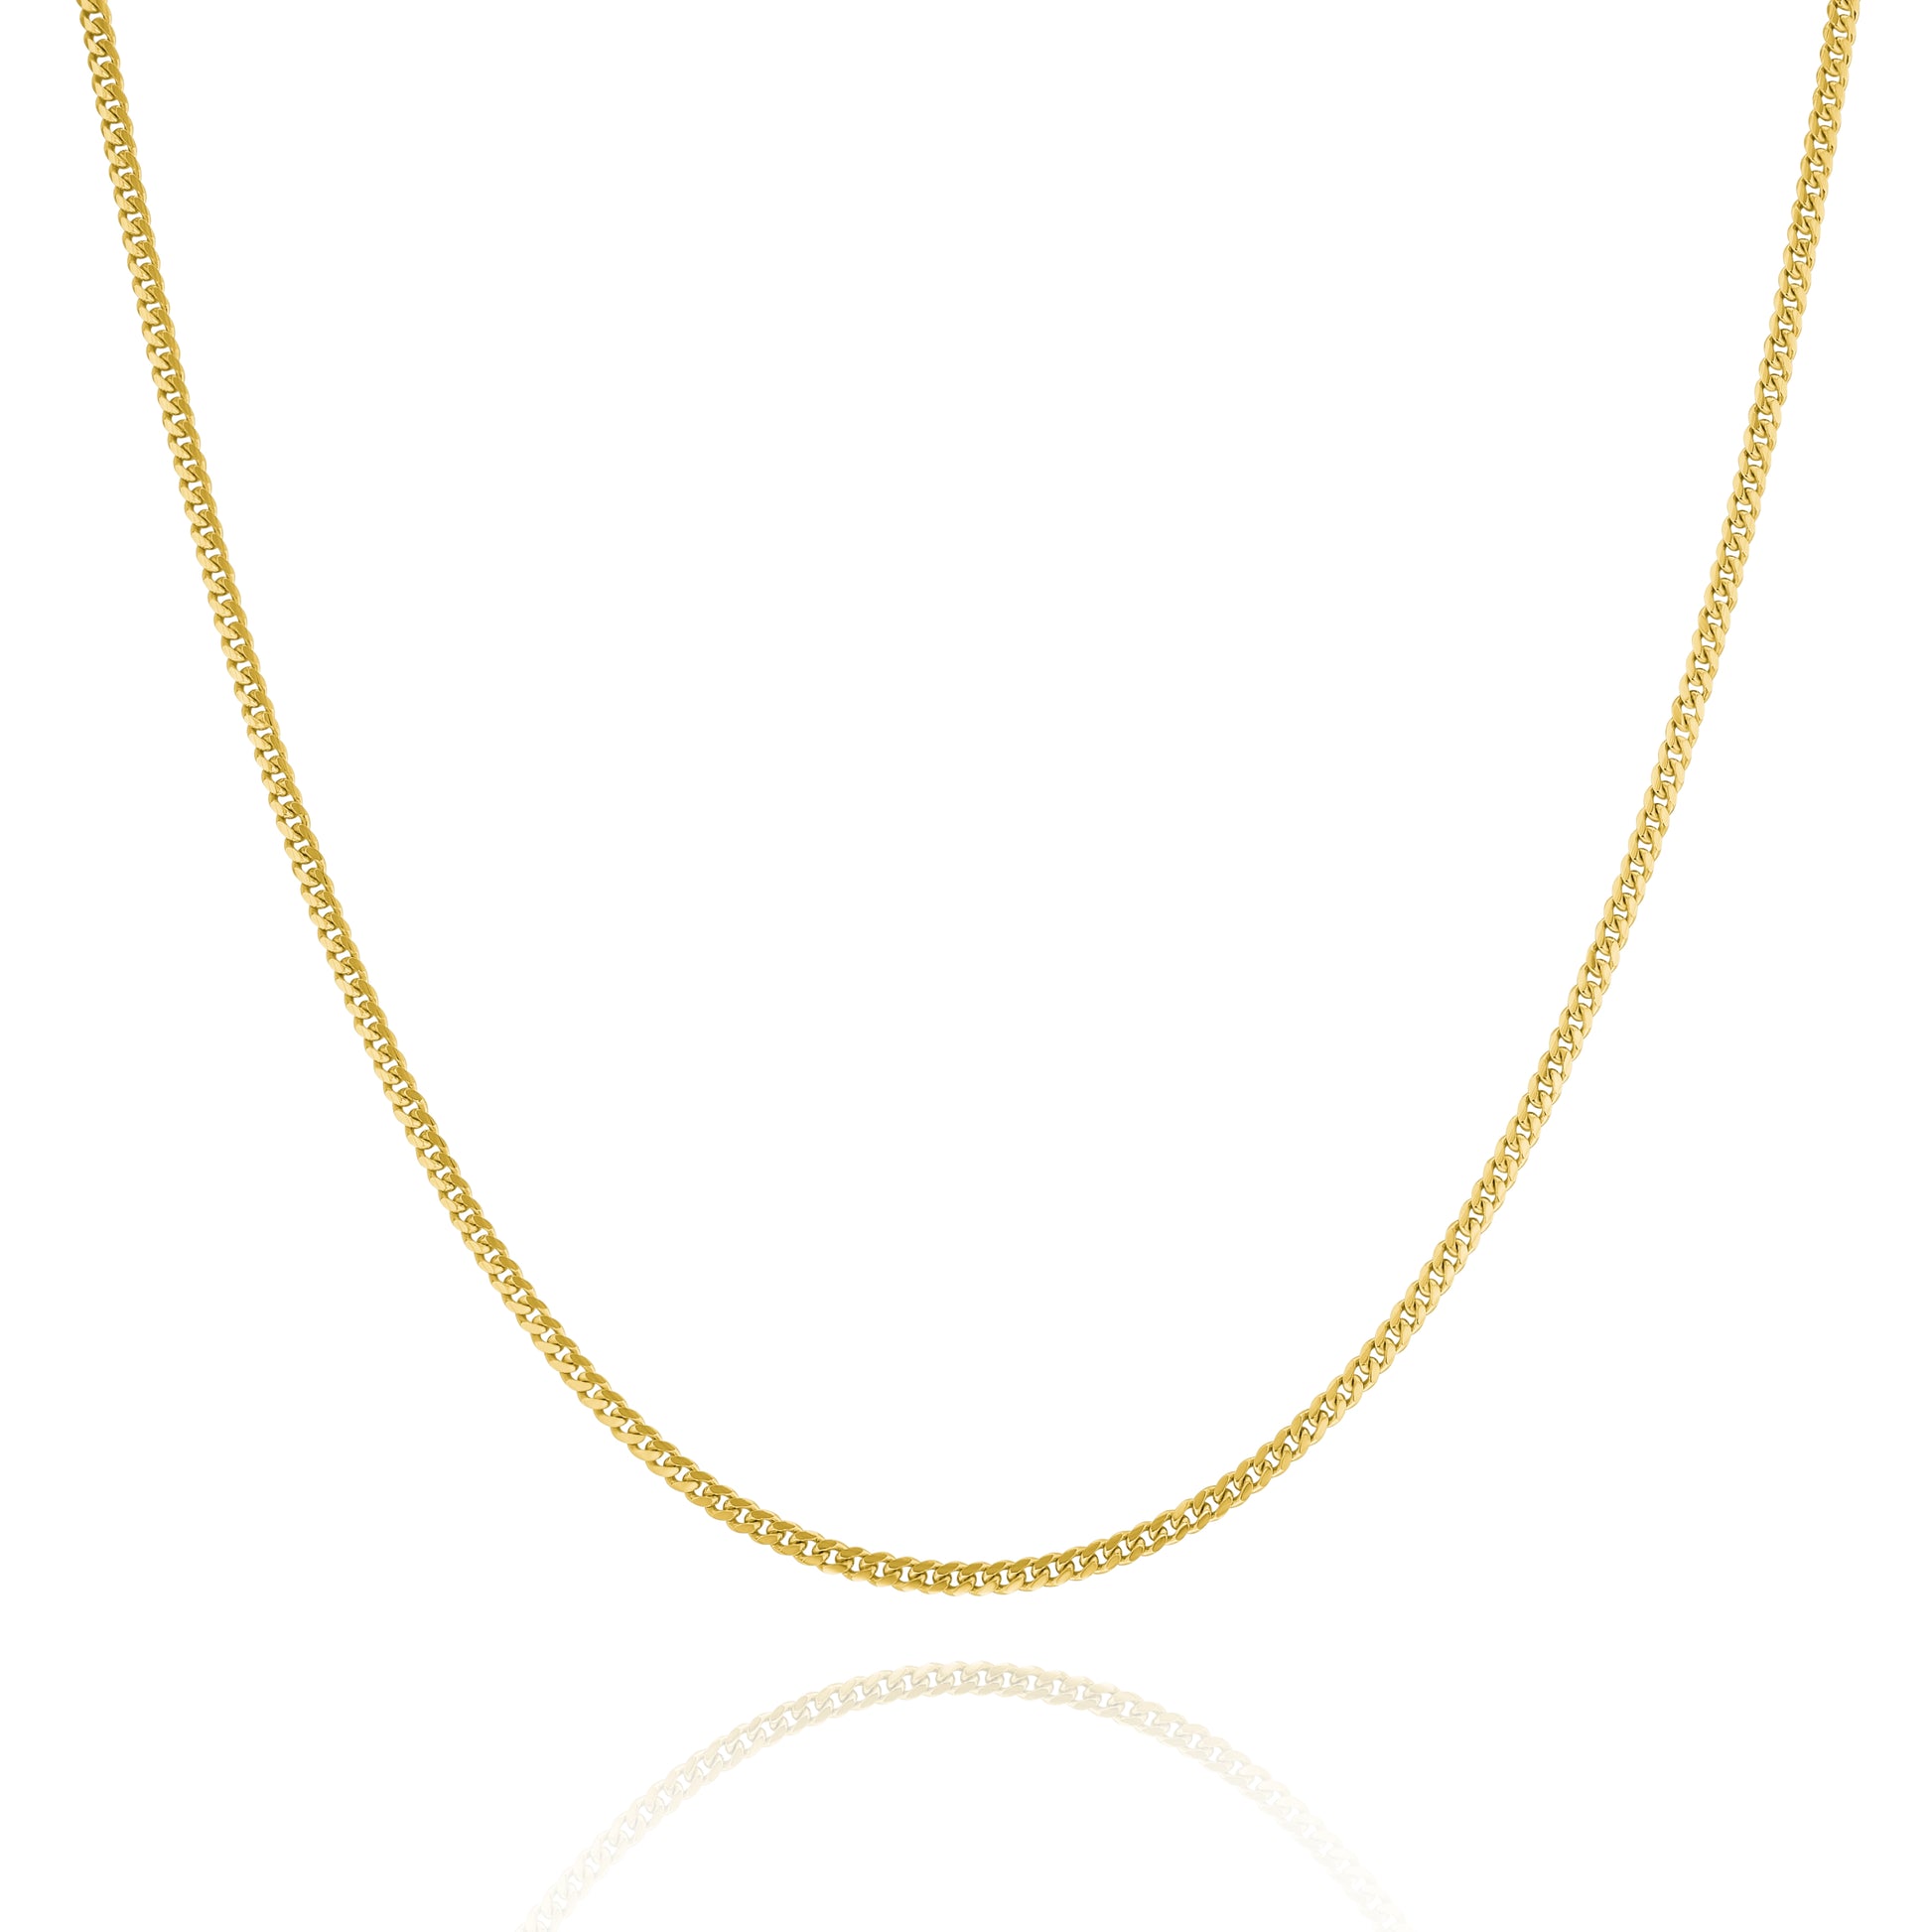 10K Yellow Gold Lobster Clasp Cuban Link Chain 2Mm 16In 2.9Dwt / 4.5 G